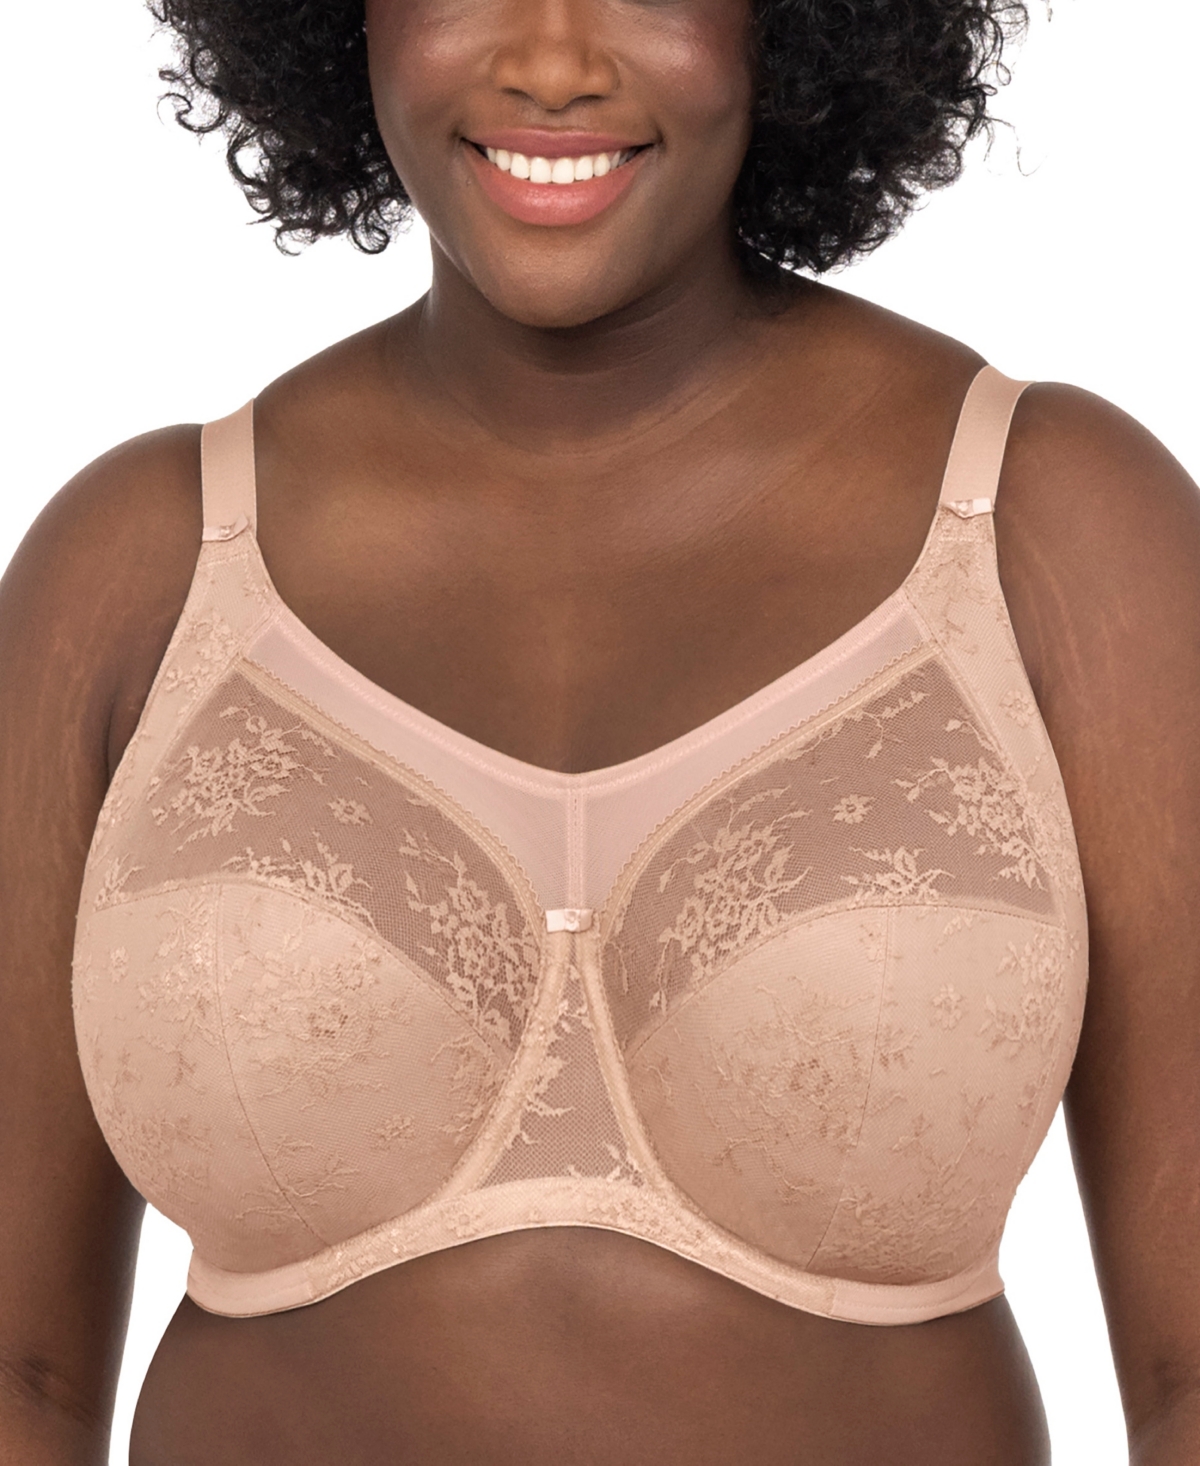 Women's Verity Full Cup Underwire Bra, GD700204 - Fawn